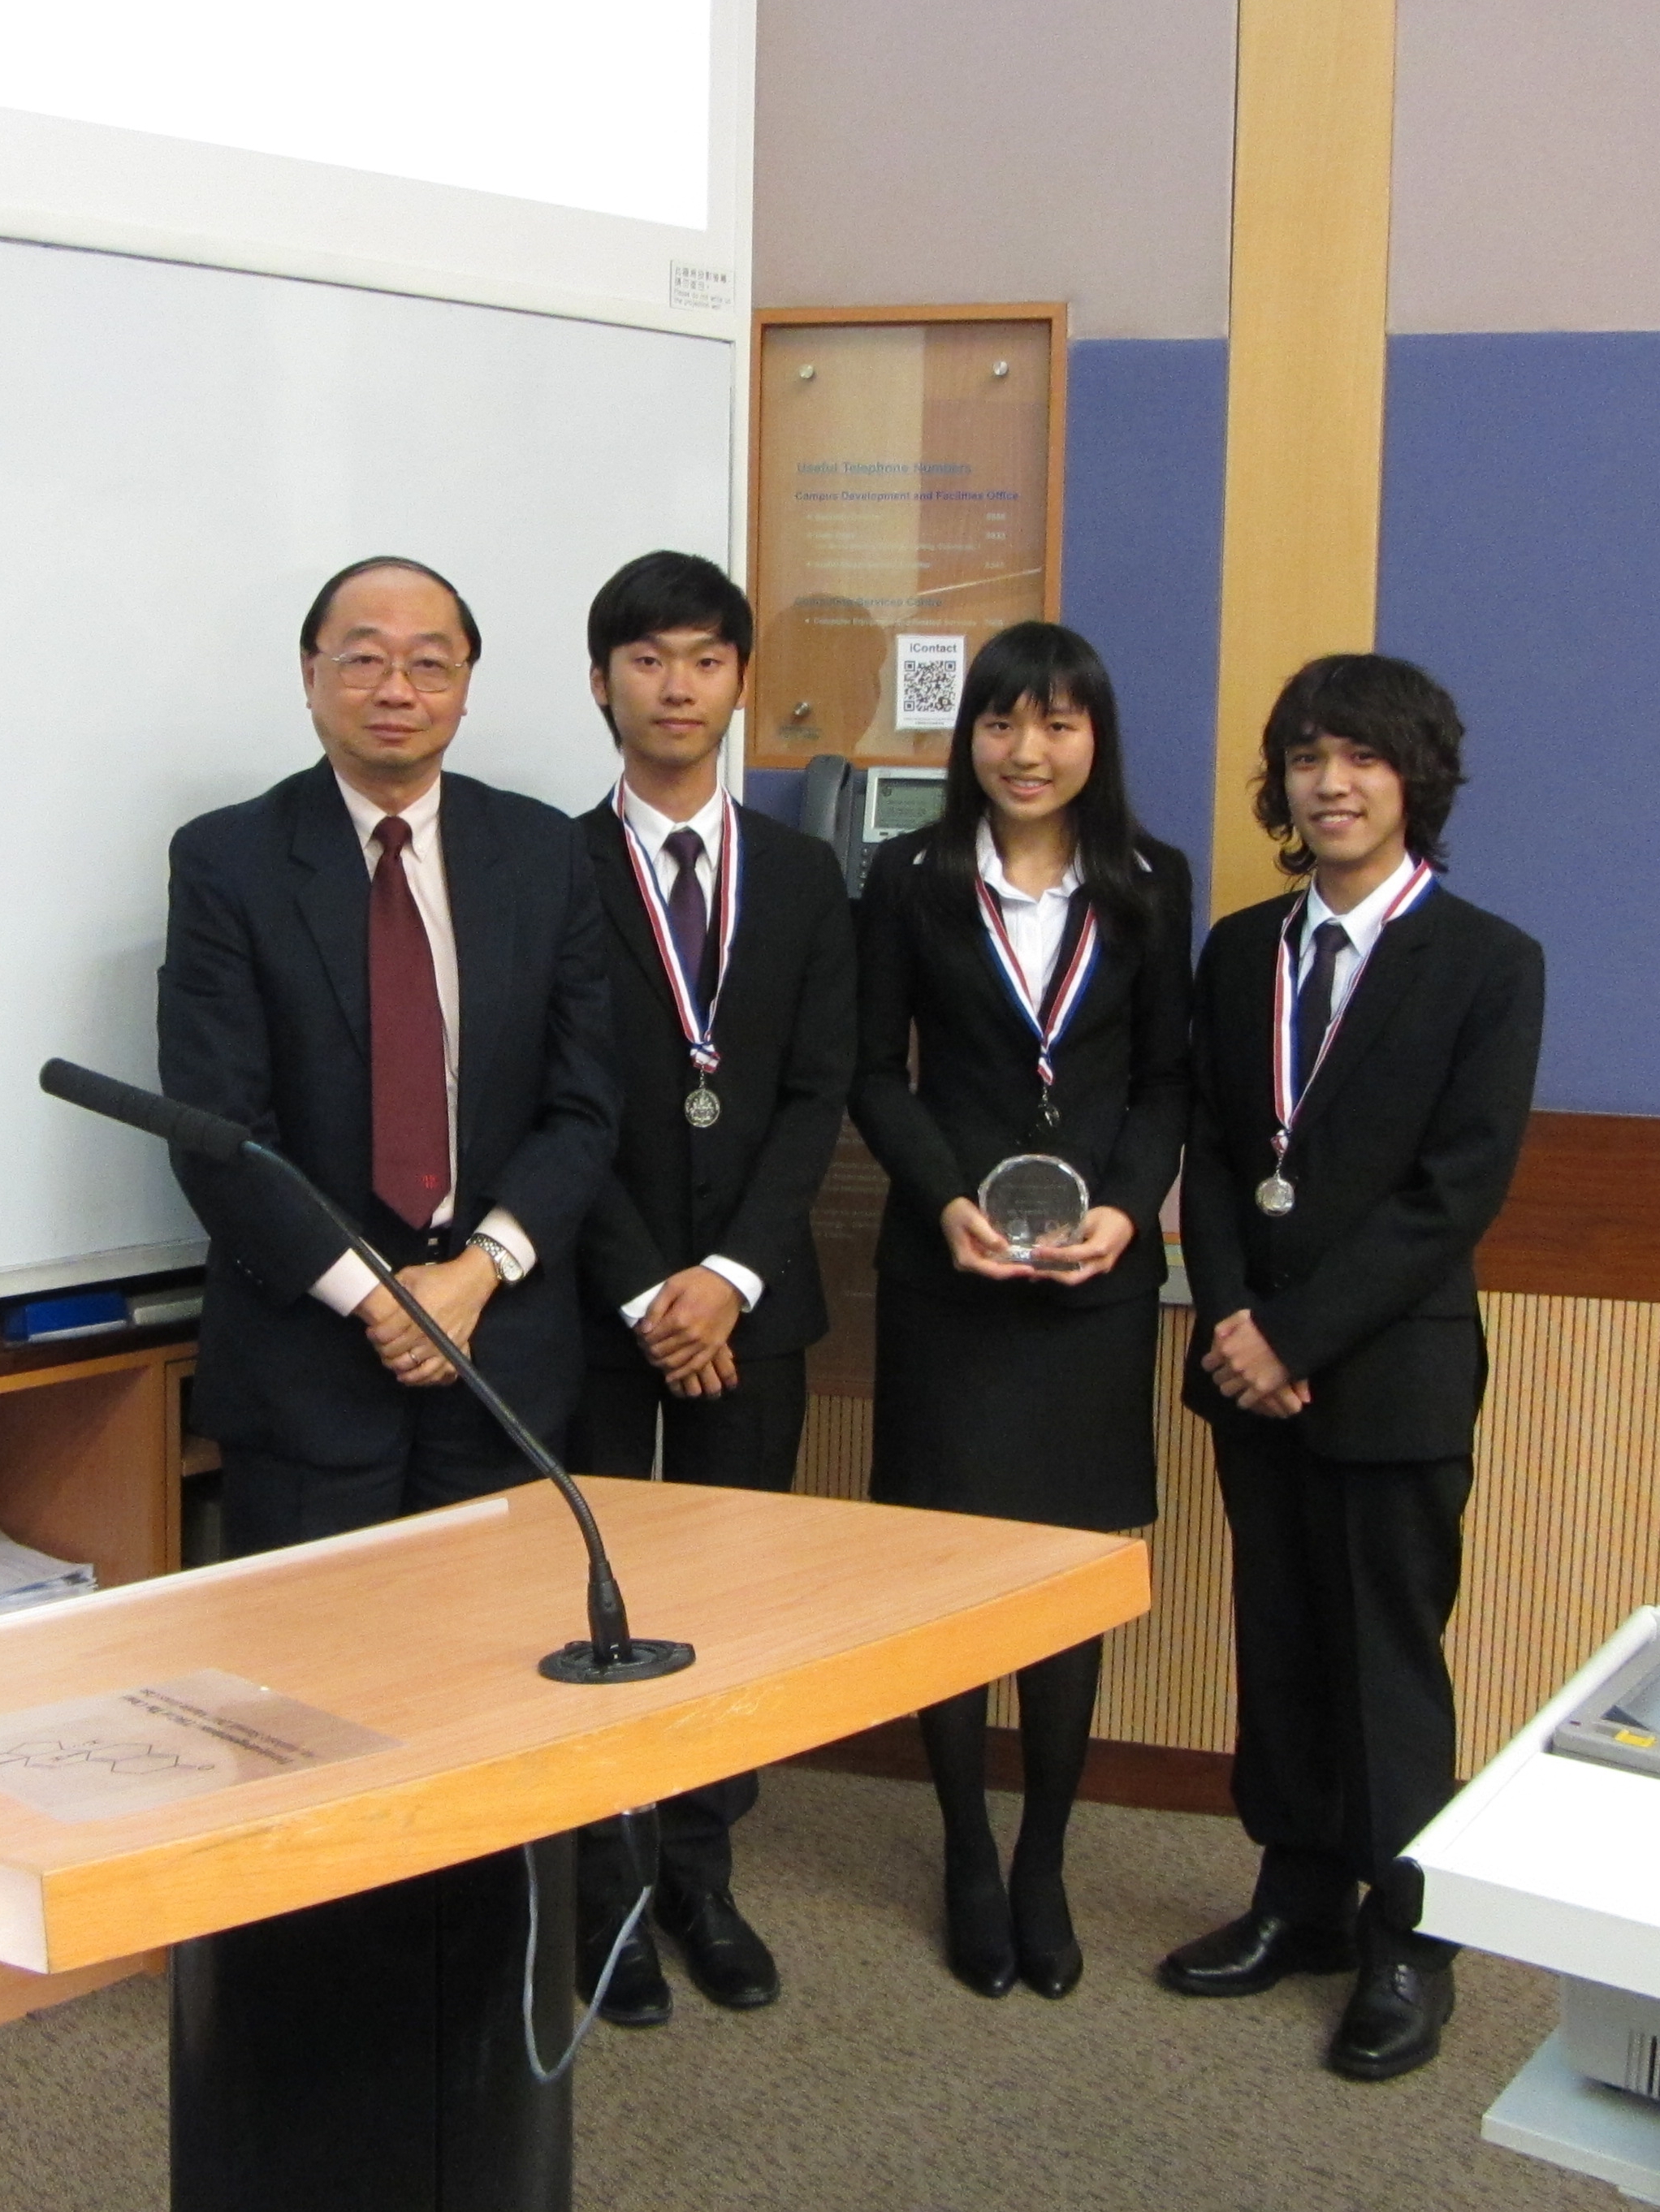 CUHK Team presenters received the prize from Prof. Wong (Guest of Honor).